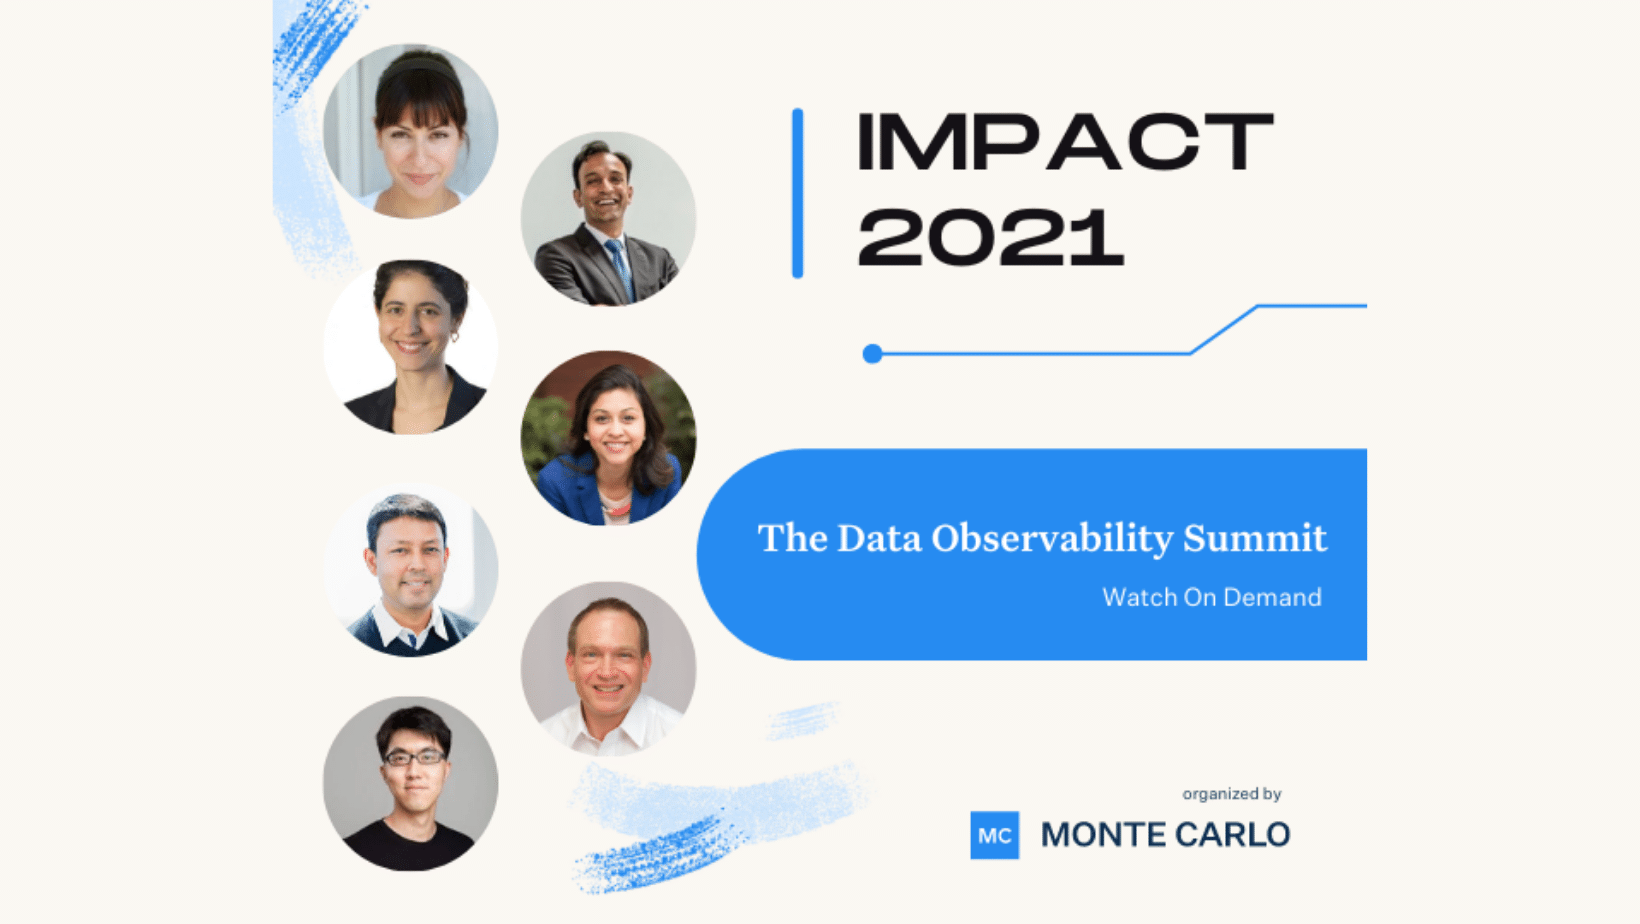 IMPACT 2021: The Data Observability Summit Videos Are Now Available On Demand